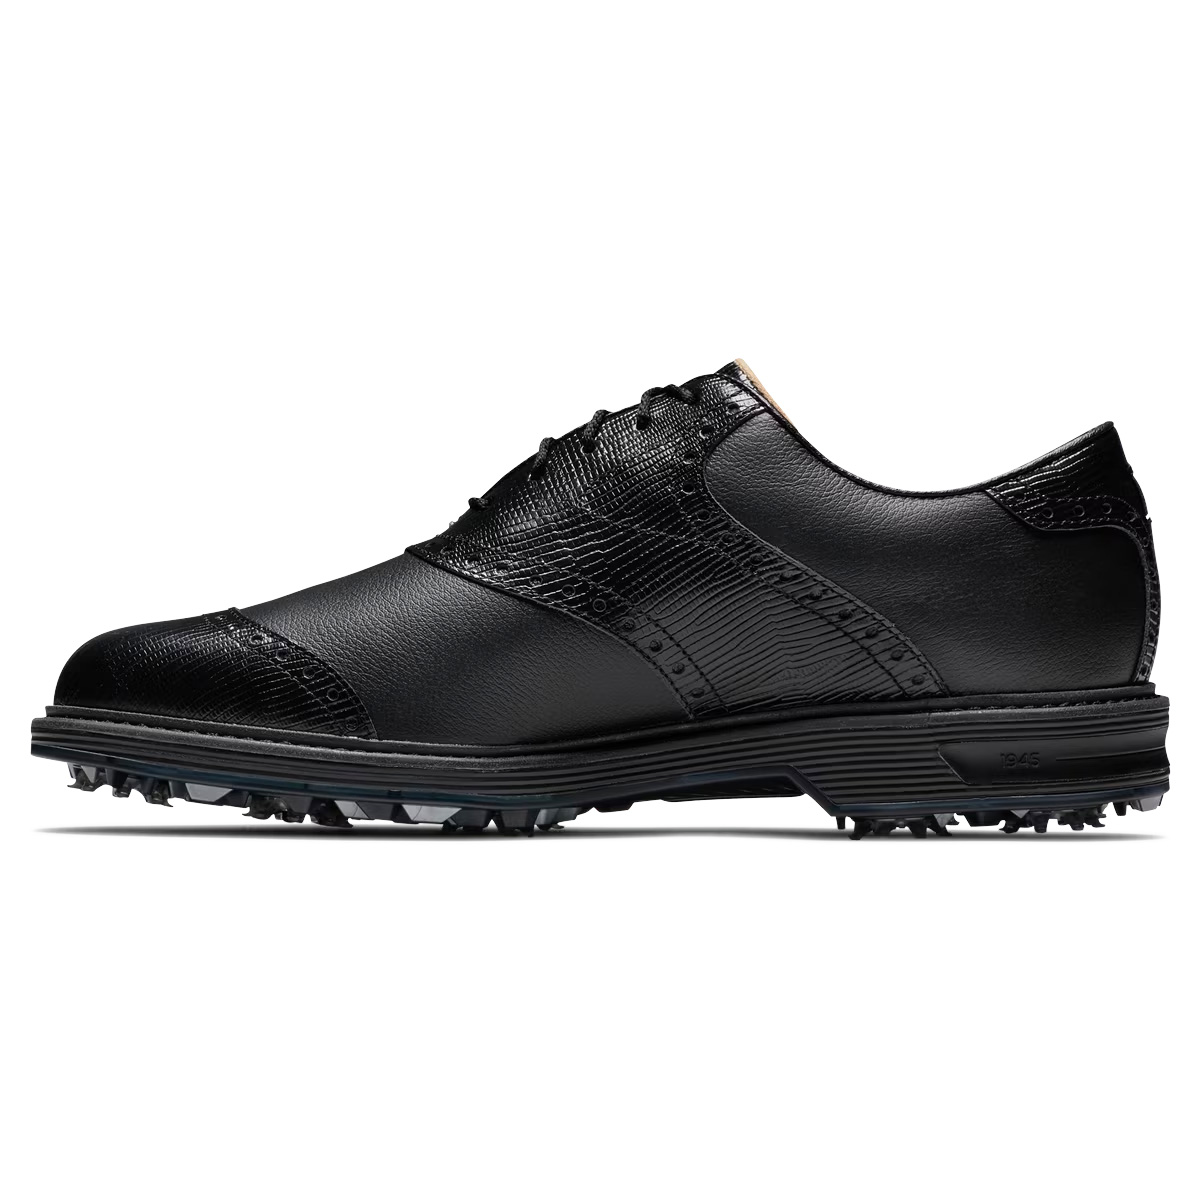 FootJoy Premiere Series Wilcox Mens Spiked Golf Shoes 